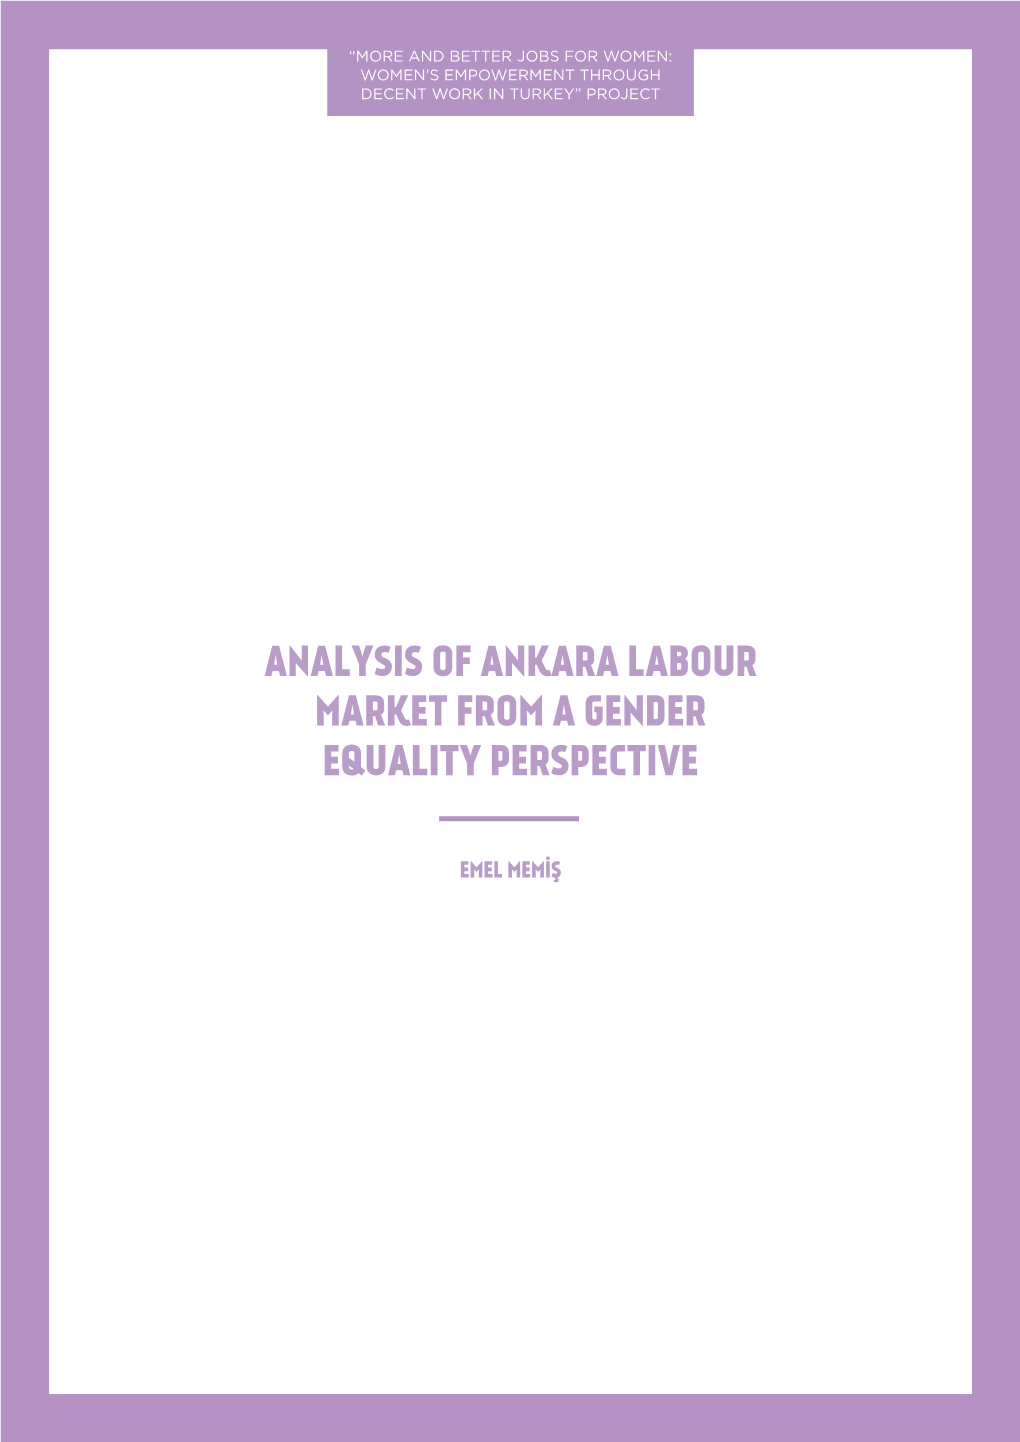 Analysis of Ankara Labour Market from a Gender Equality Perspective